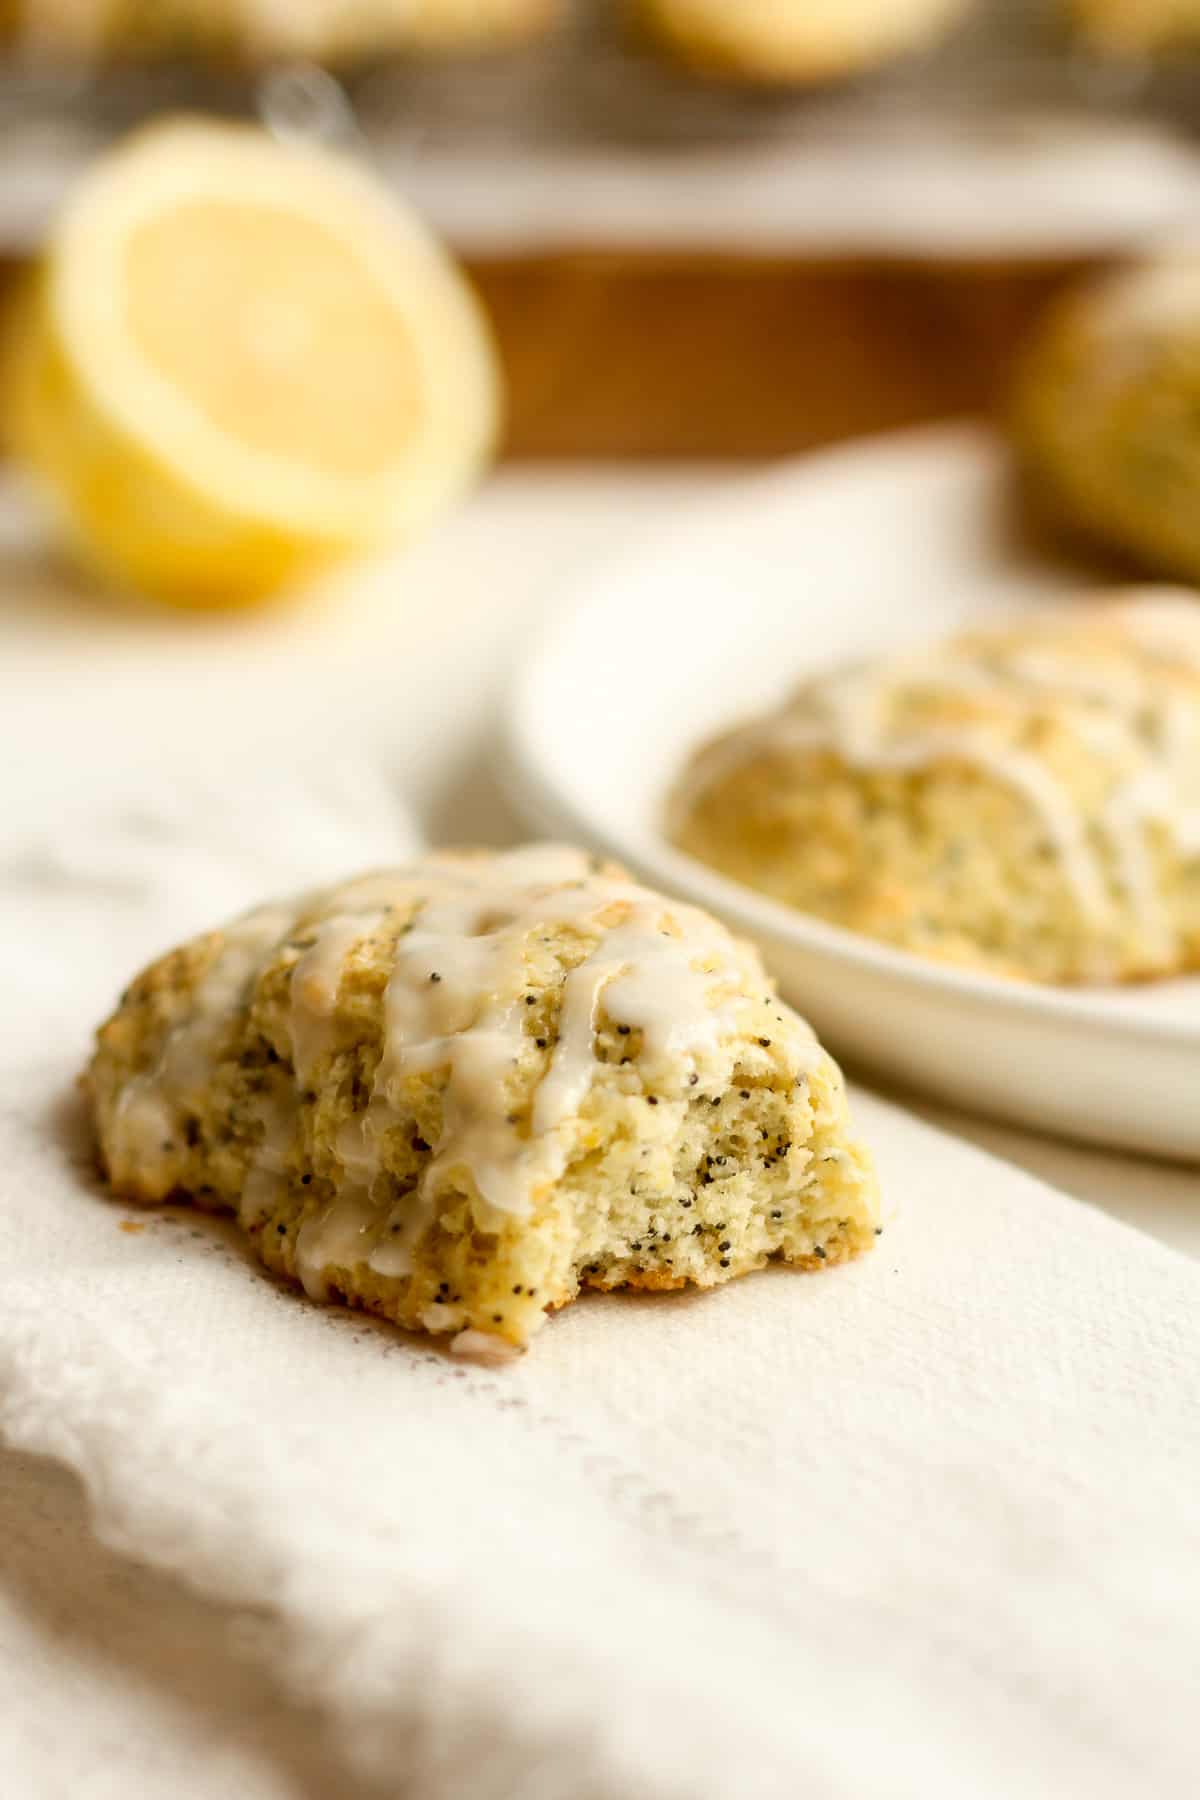 Closeup on a lemon poppy seed scone with a bite missing.